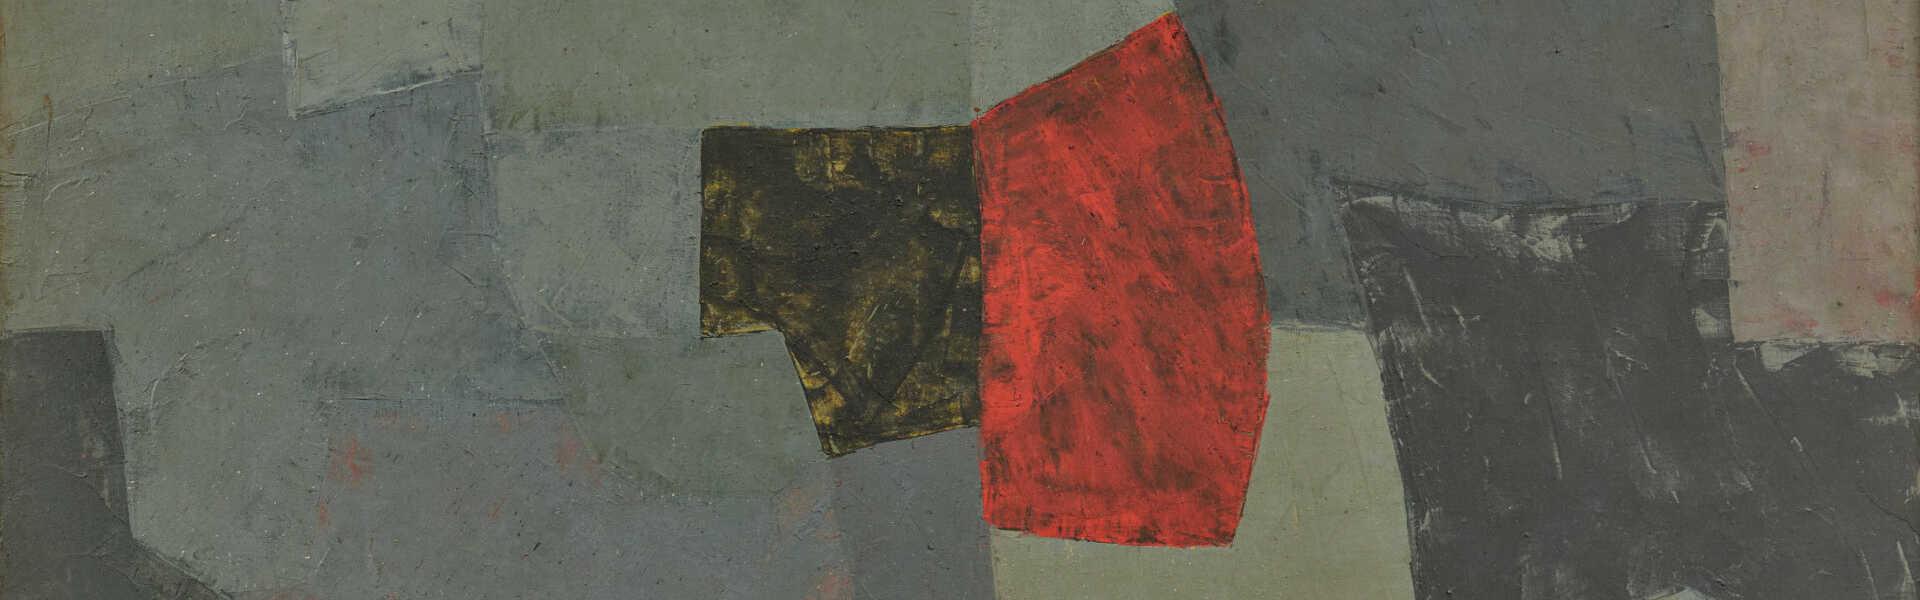 Serge Poliakoff. Composition grise